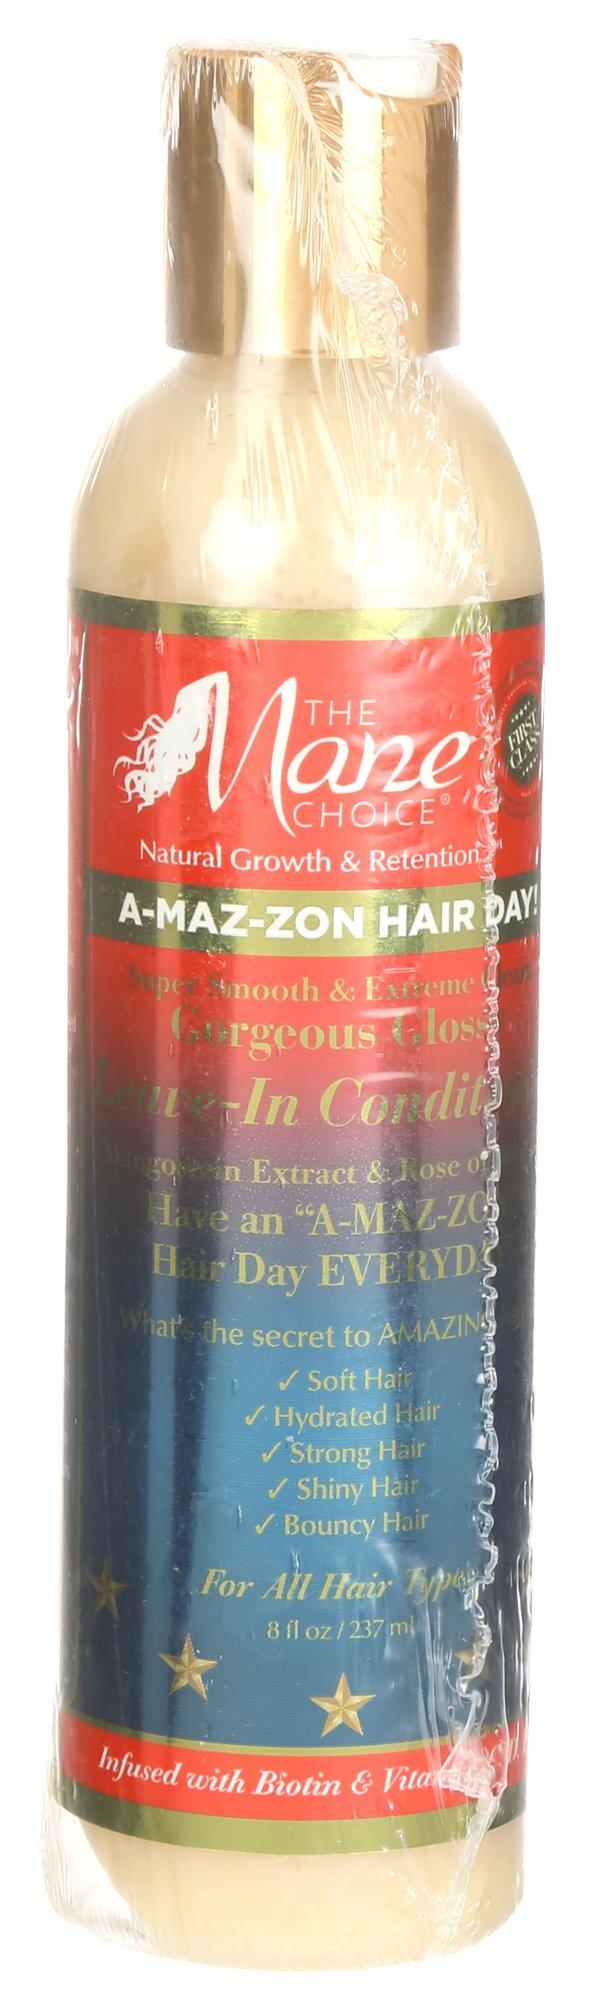 8 oz. Gorgeous Glossy Leave-In Conditioner